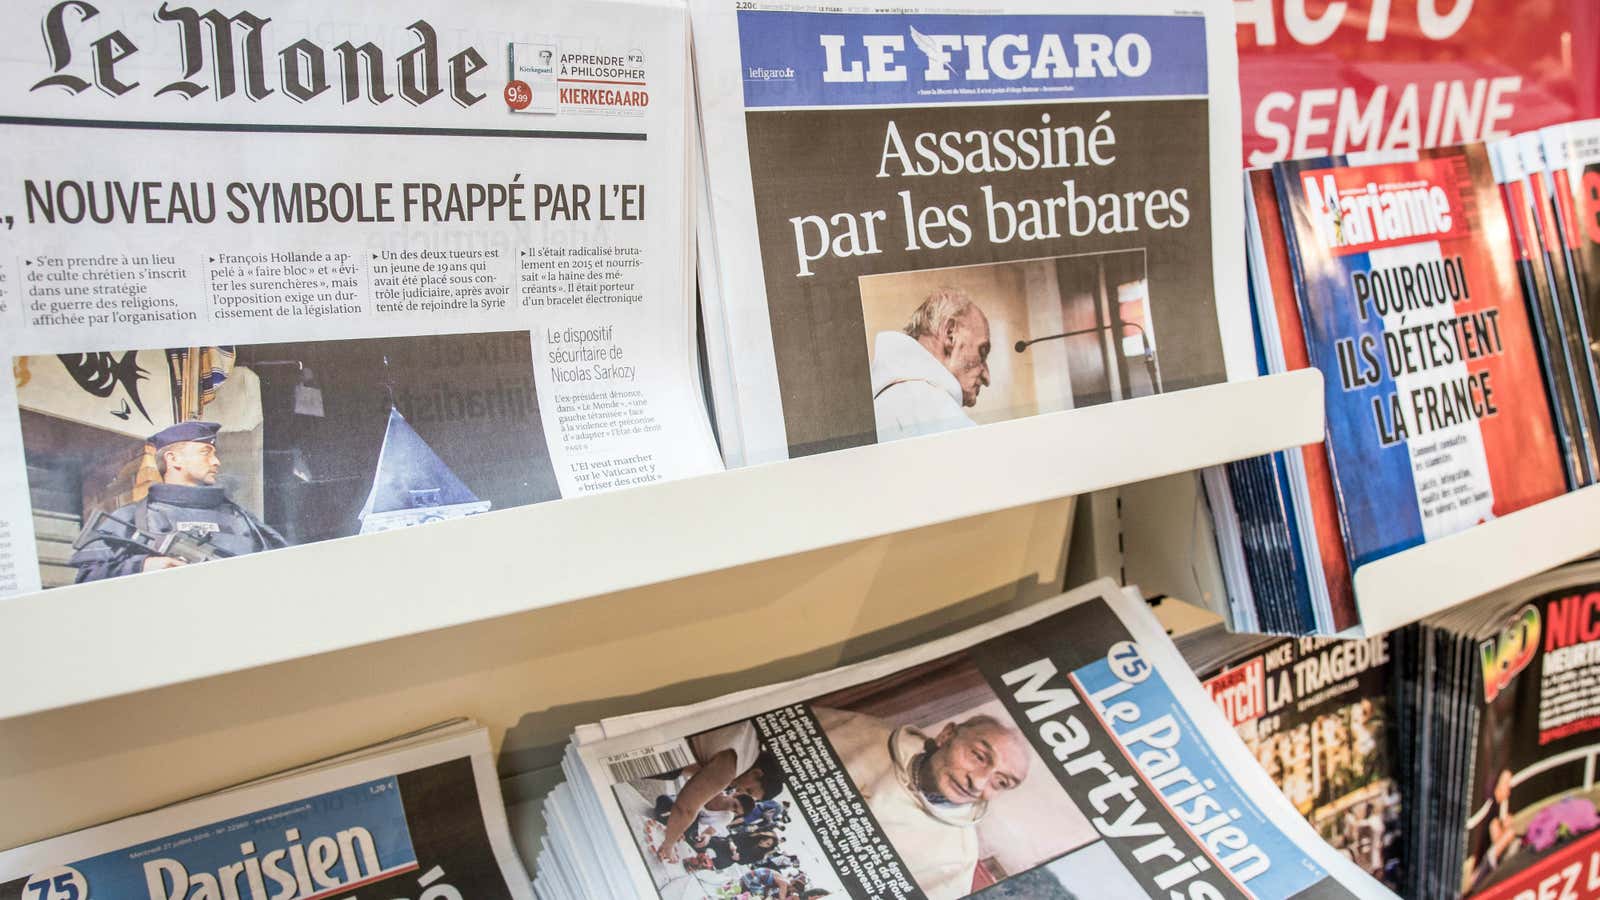 In a massive attempt to stop the spread of terror, French media are no longer publishing photos of terrorists